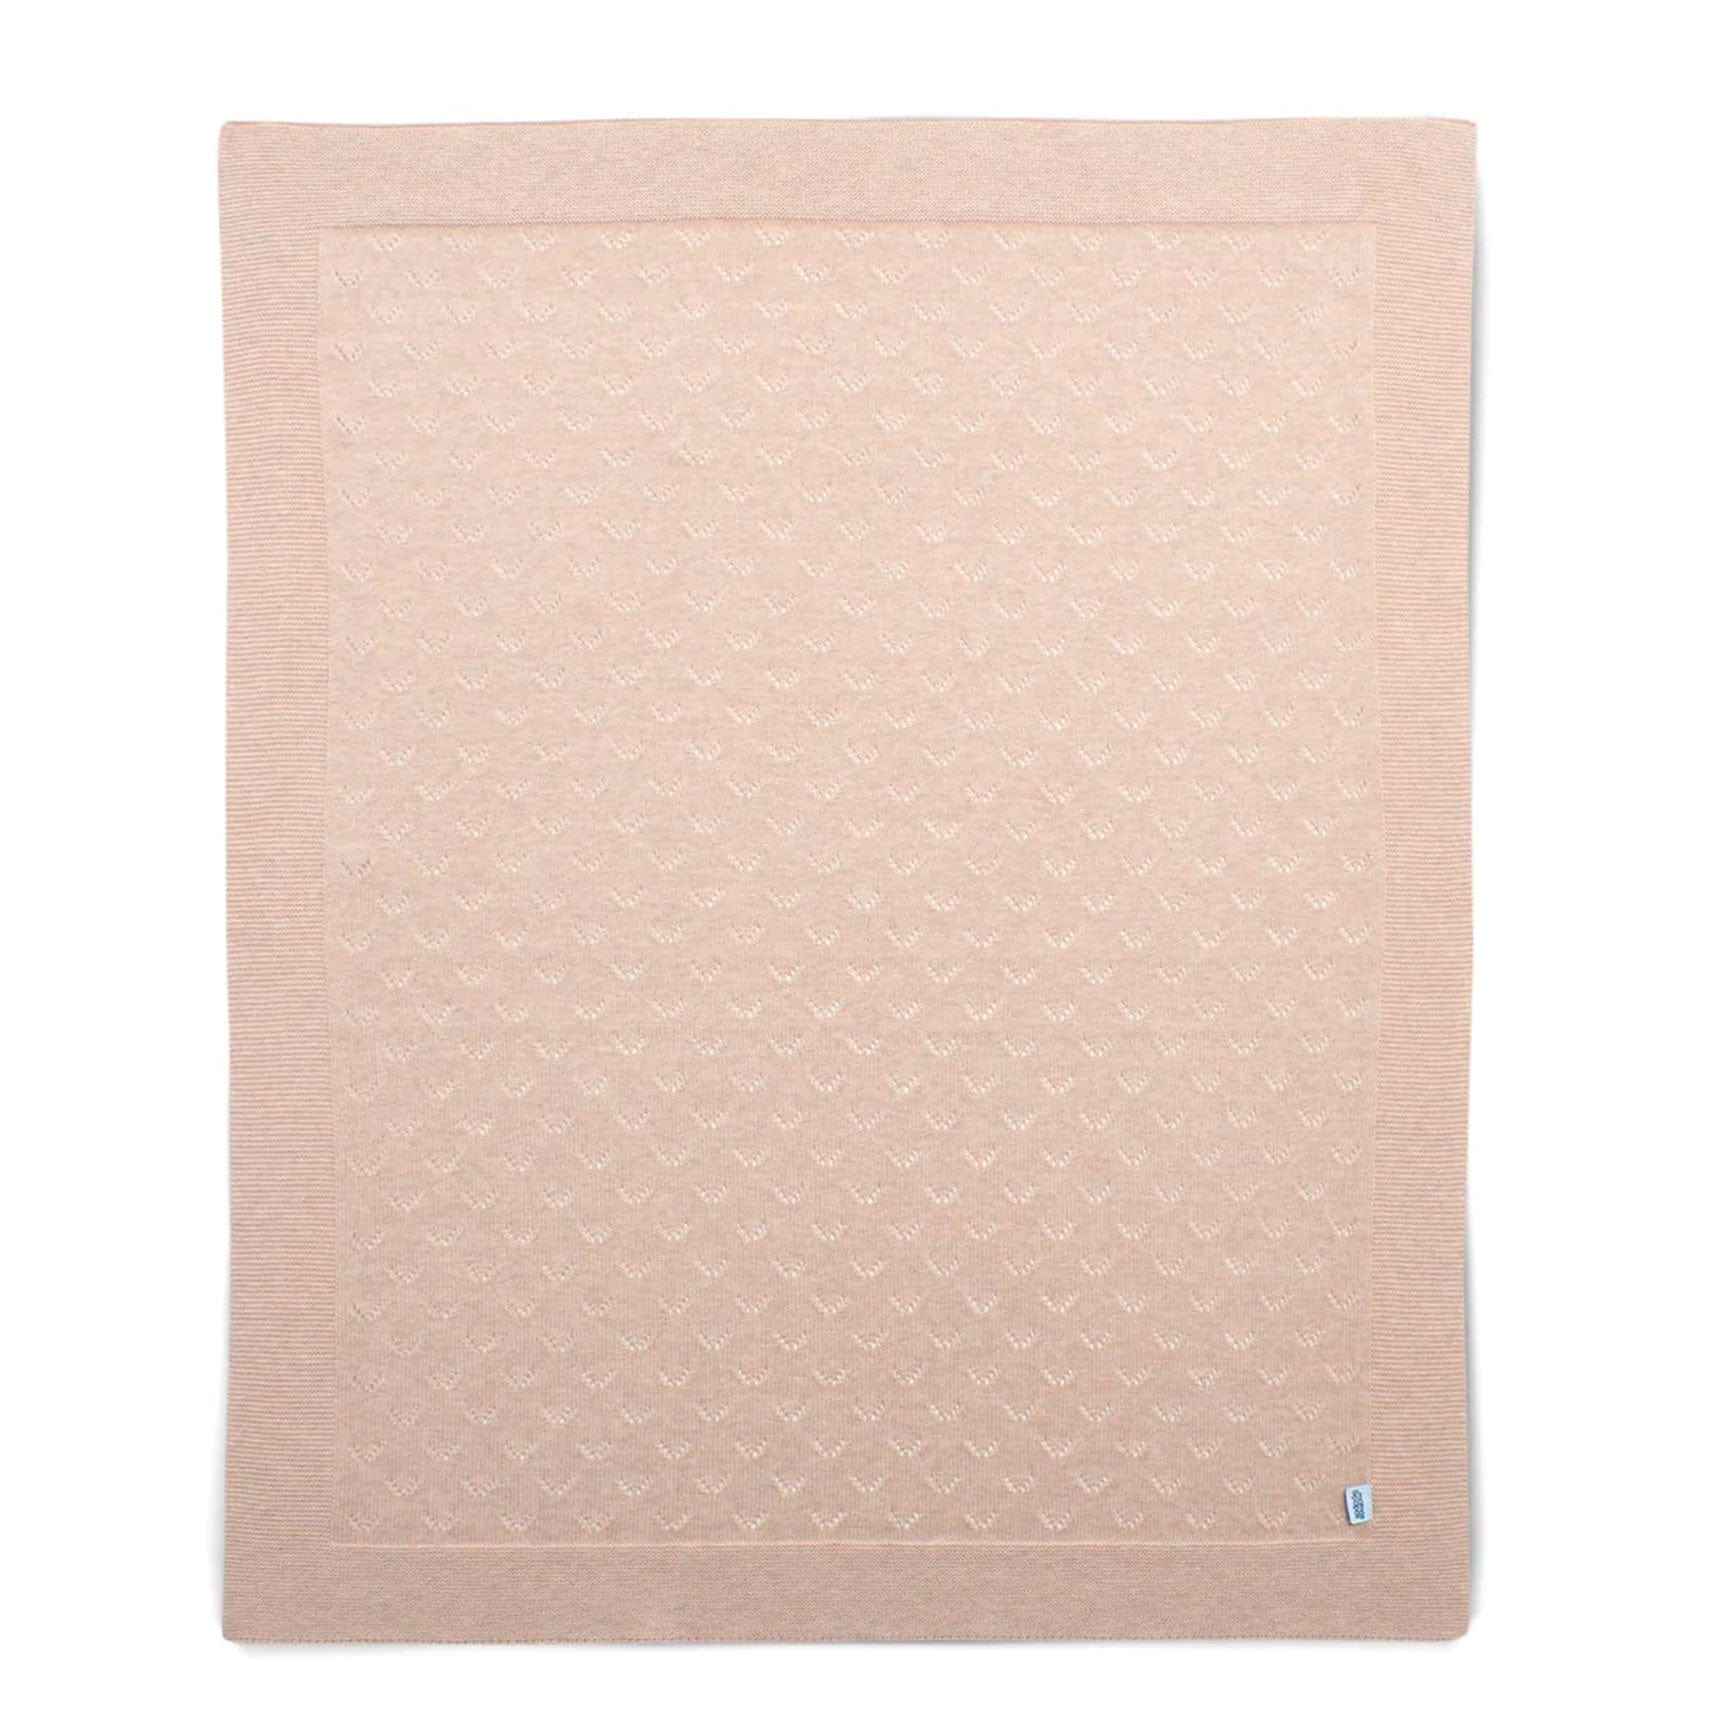 Mamas & Papas Cot & Cot Bed Blankets Mamas & Papas Knitted Blanket Small - Pink Pointelle 7883GY001